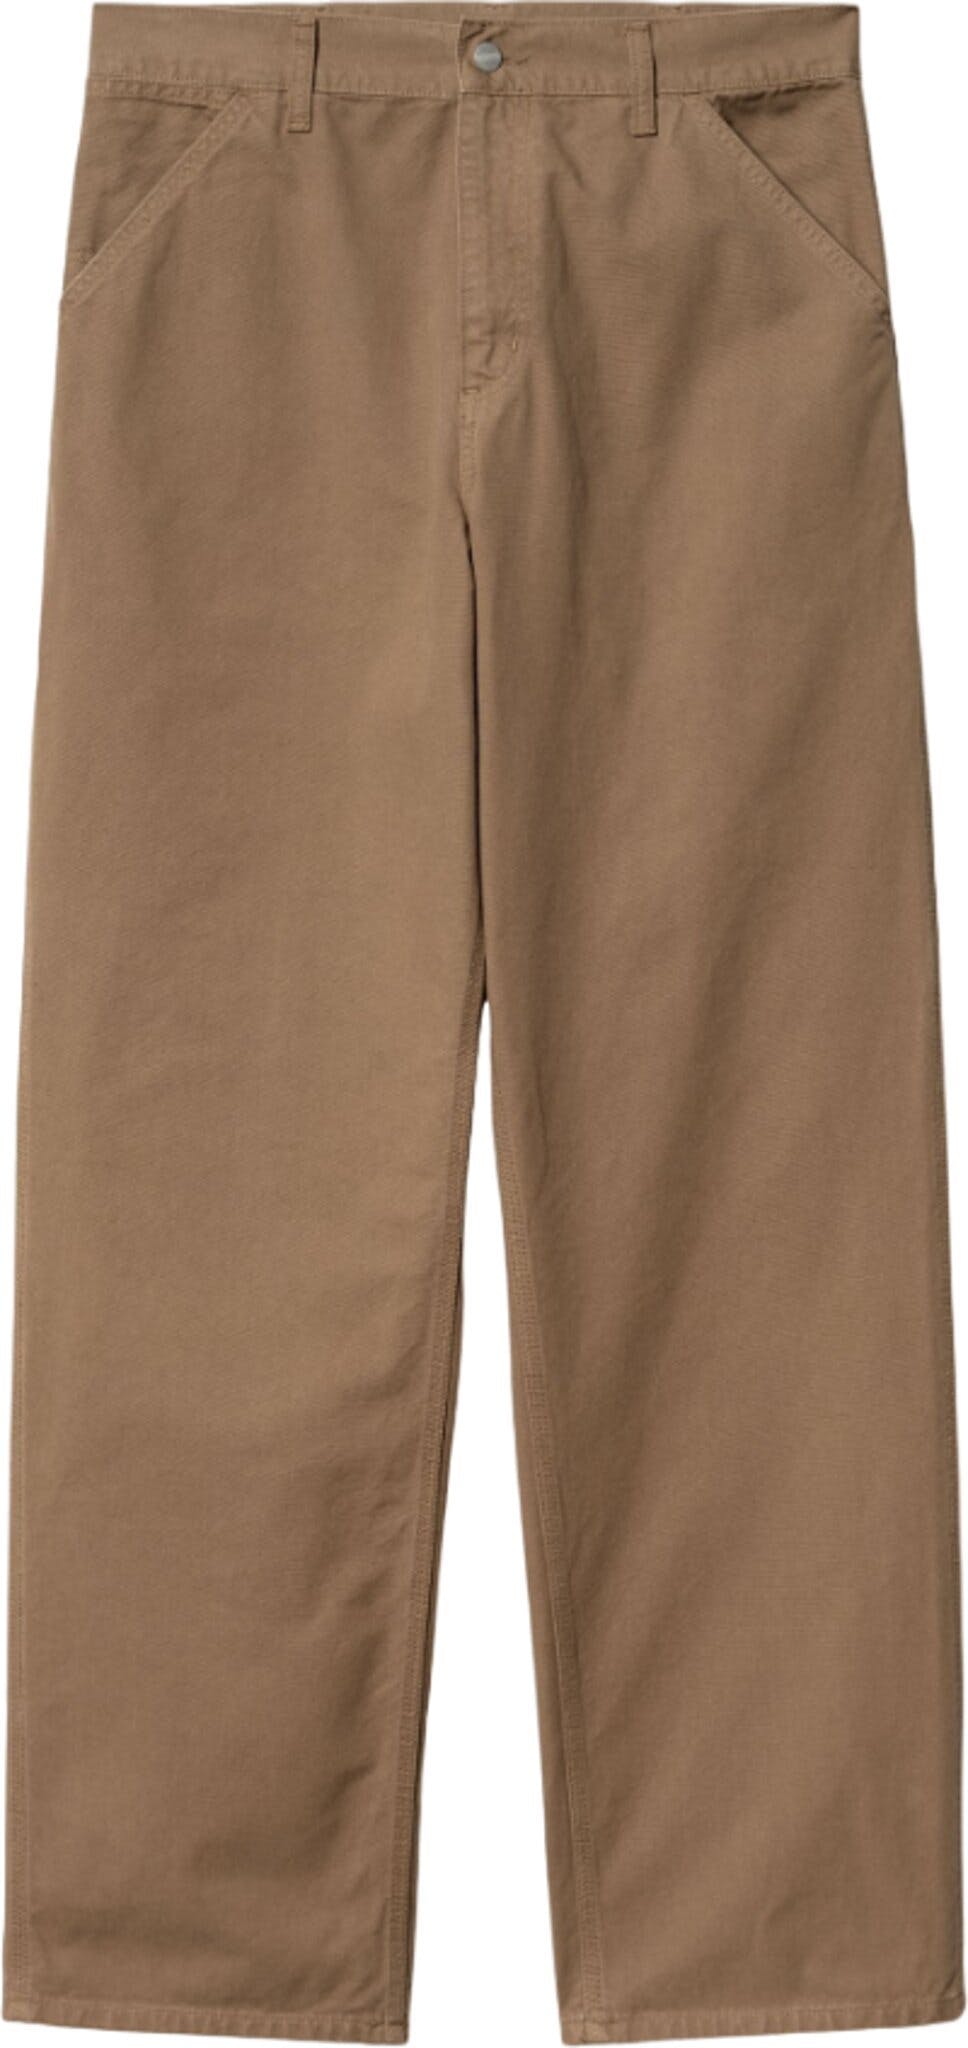 Product image for Single Knee Pant - Men's